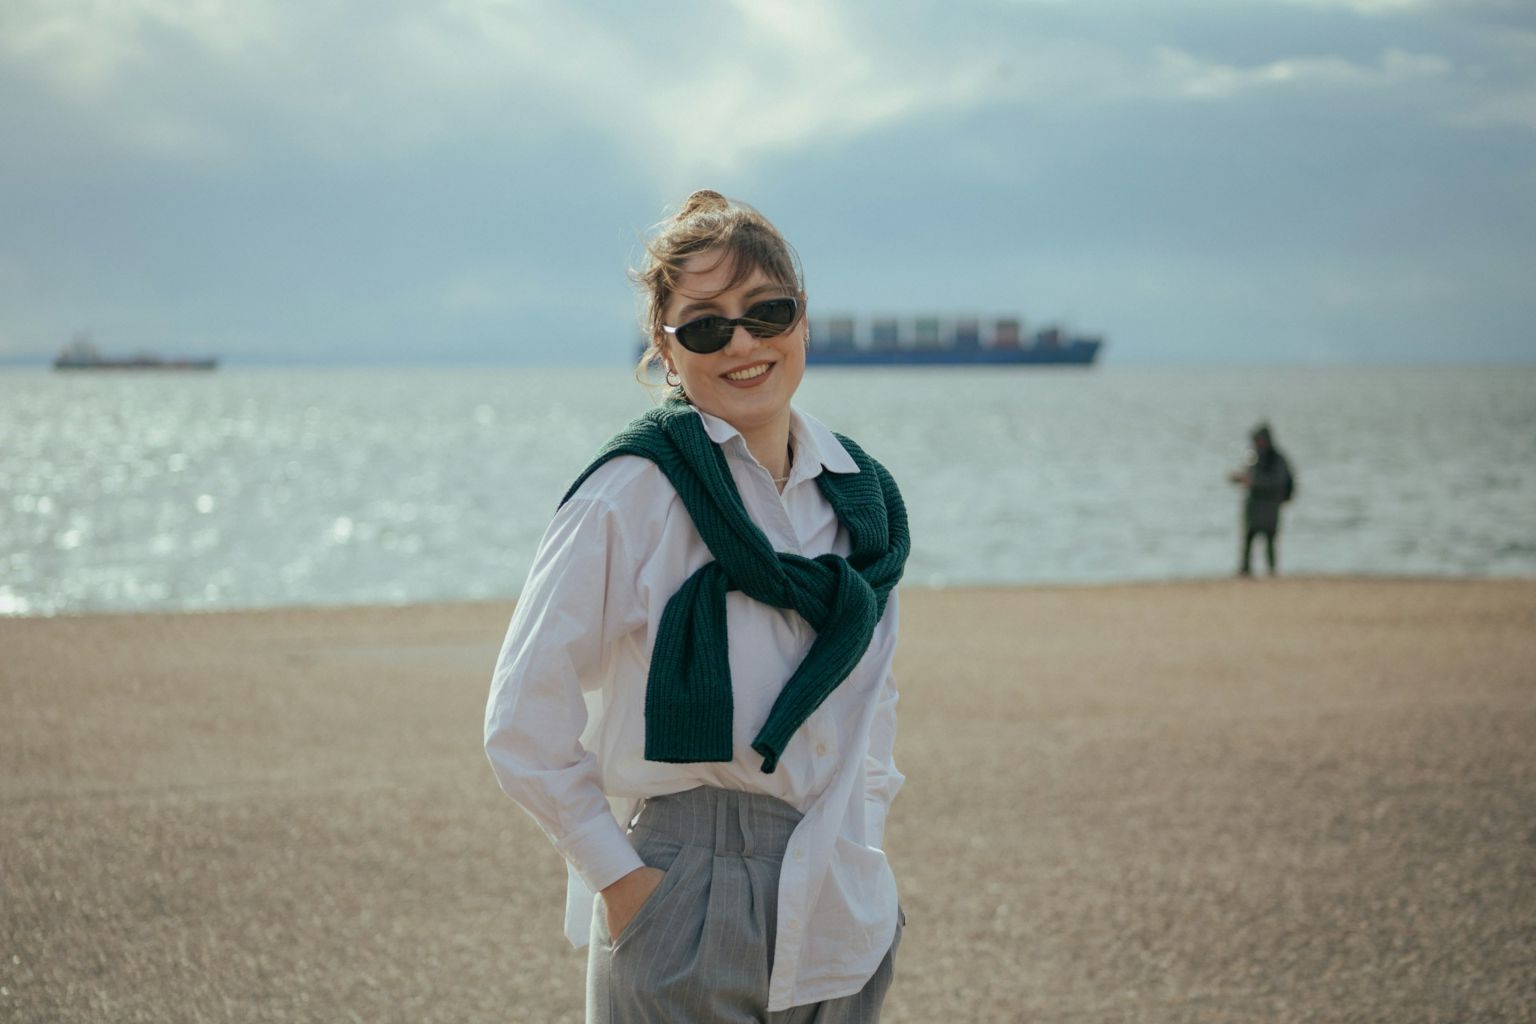 Woman wearing white shirt, green sweater, and sunglasses at the beach